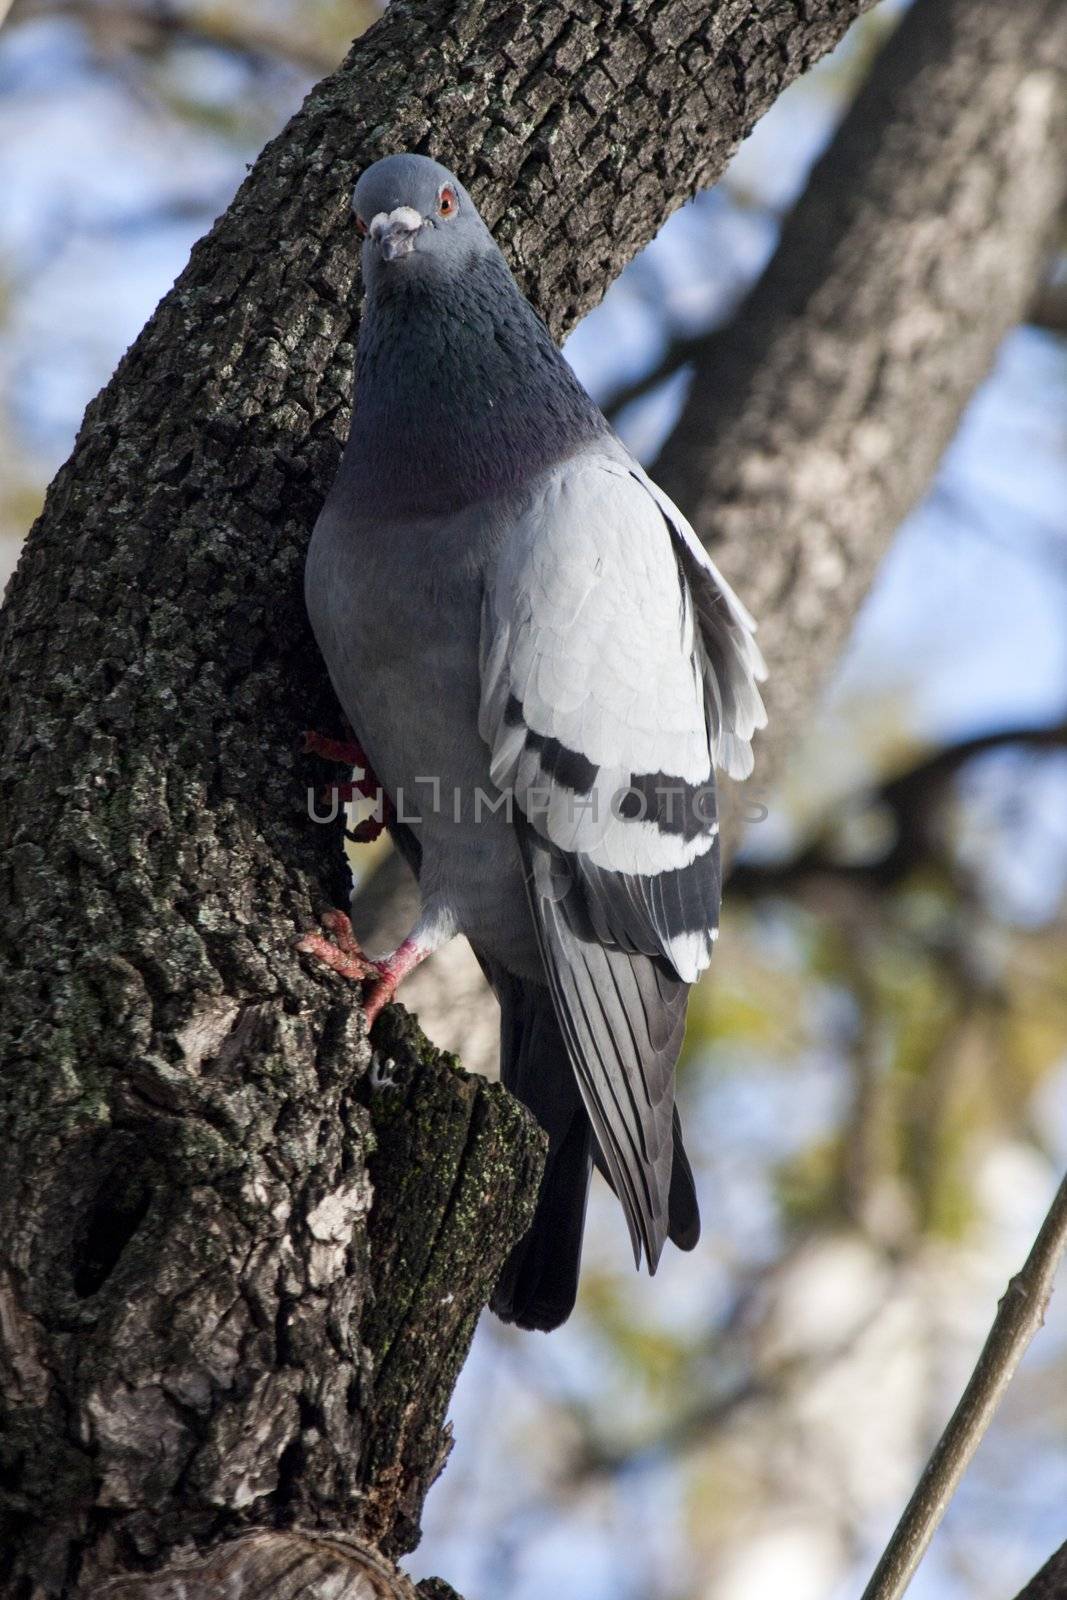 View of a urban pigeon bird on top of a tree.